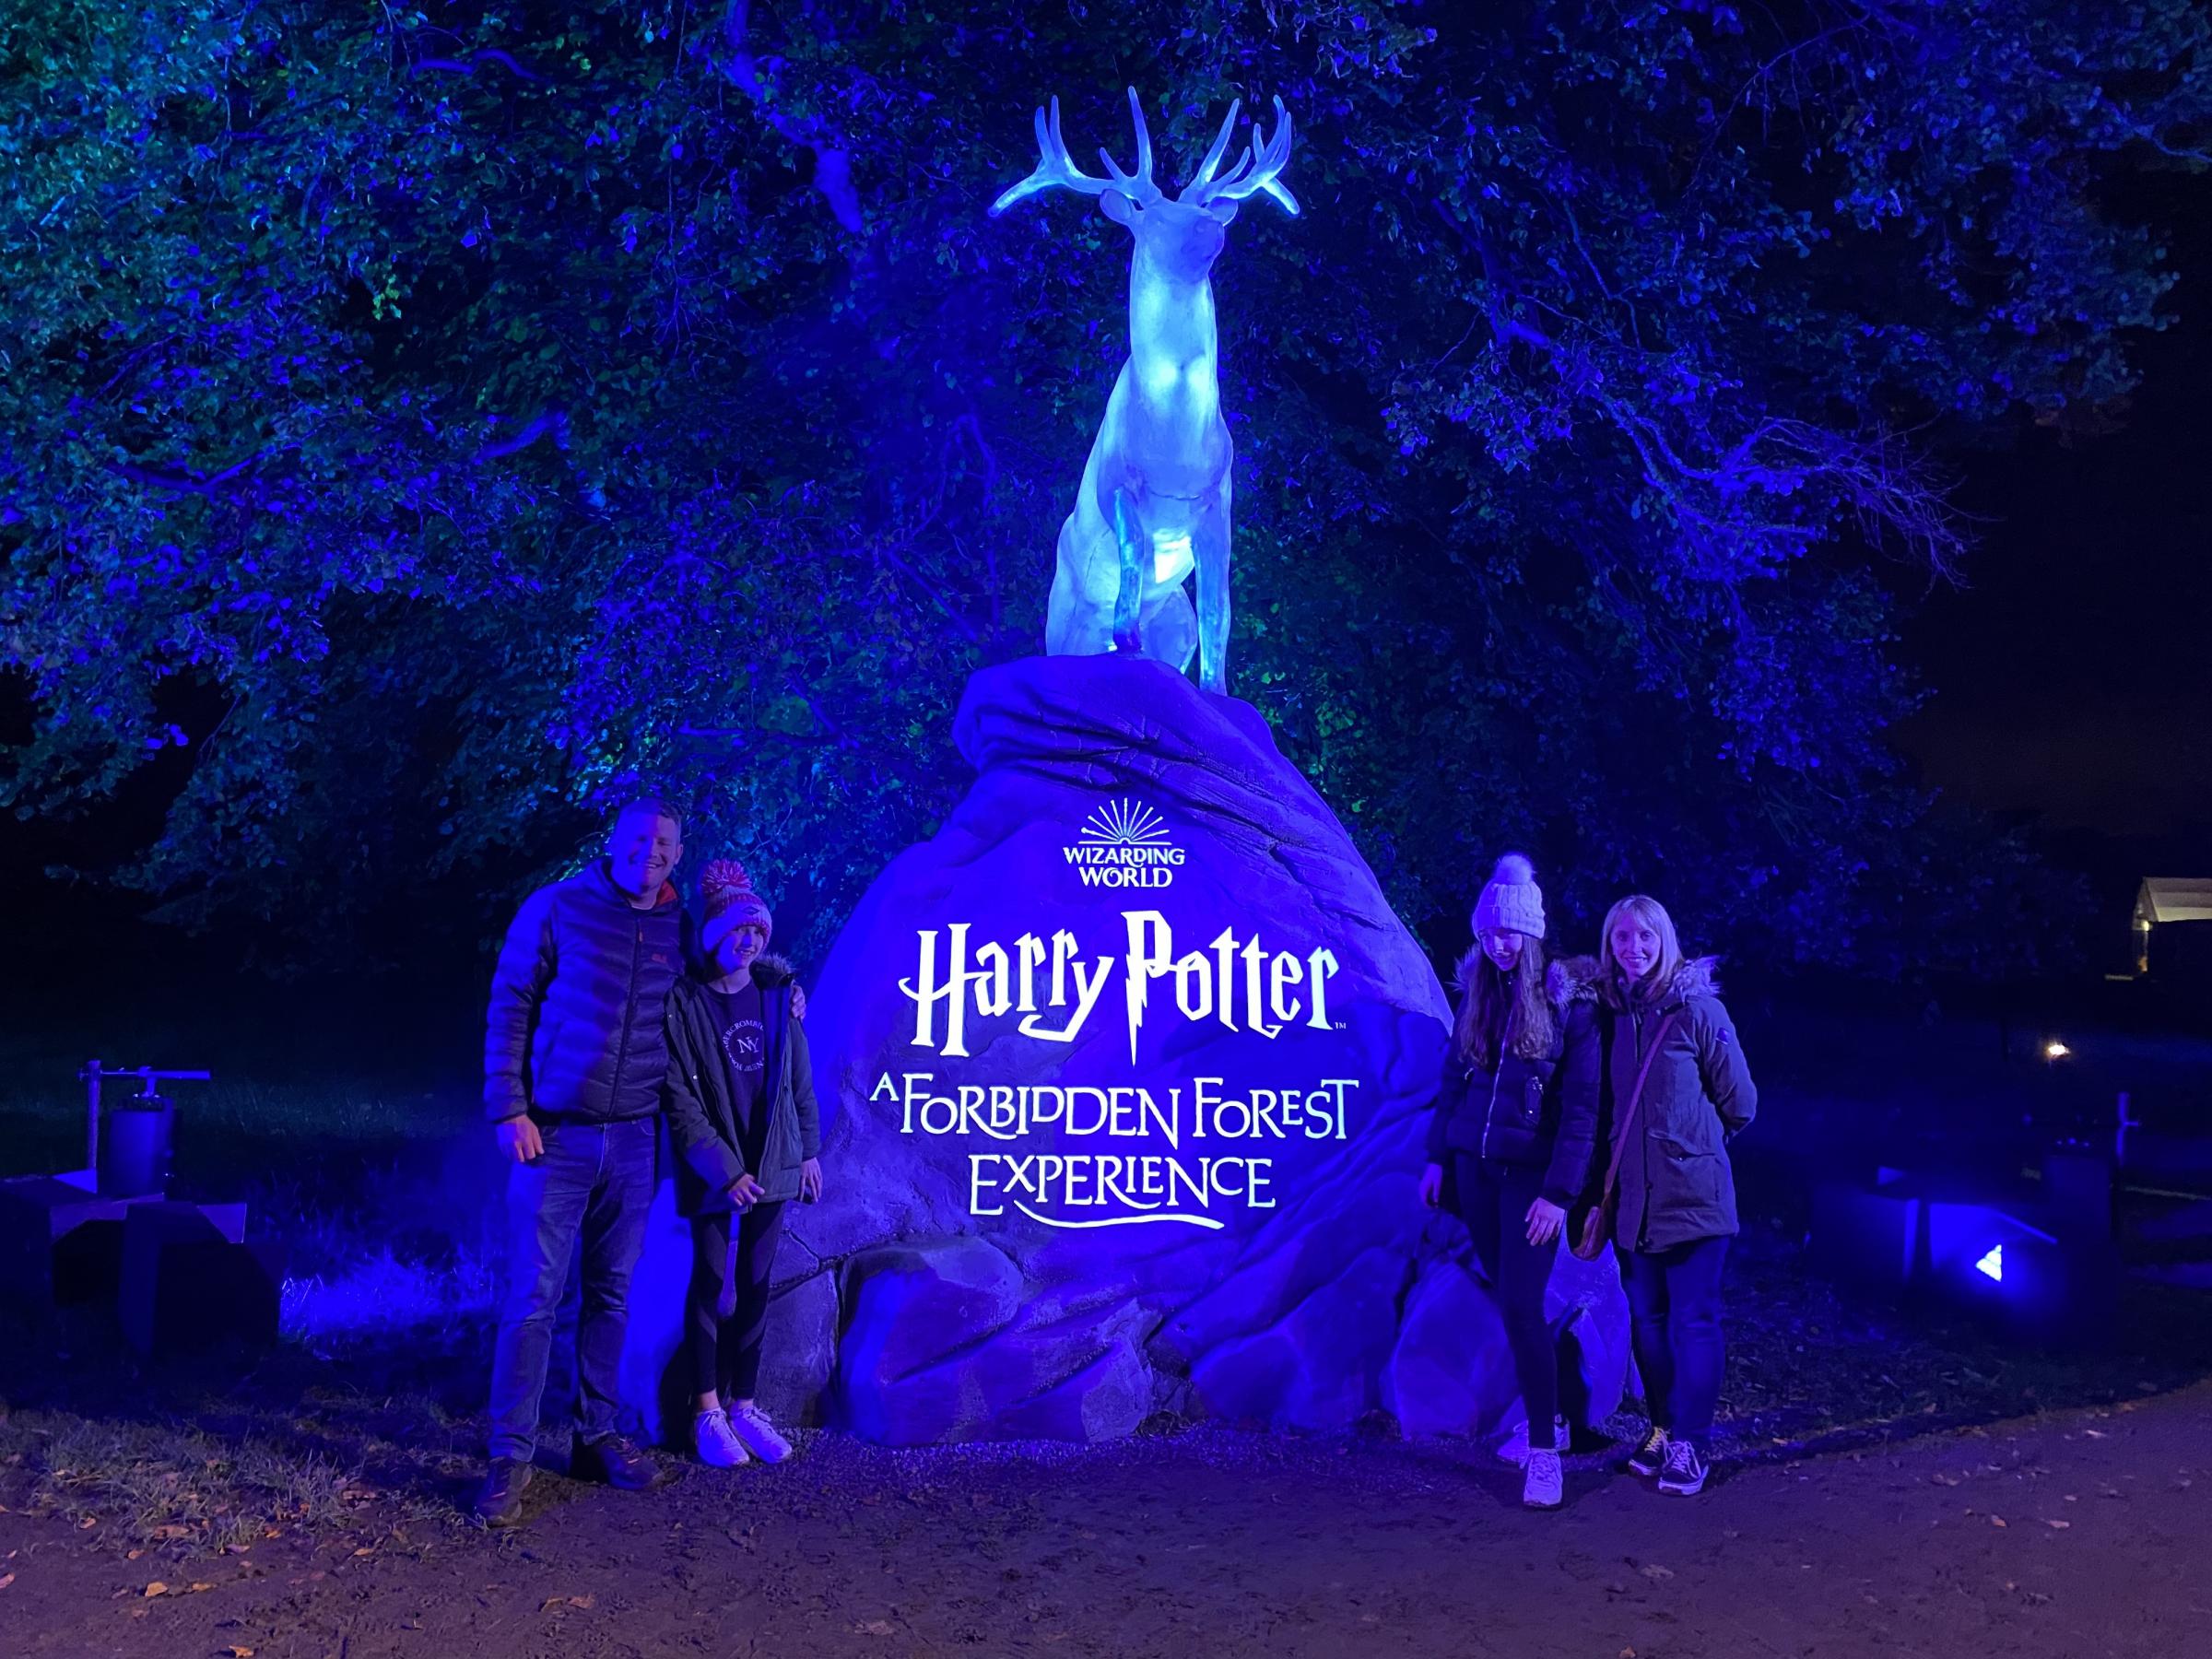 The Jones family at the Harry Potter Forbidden Forest Experience